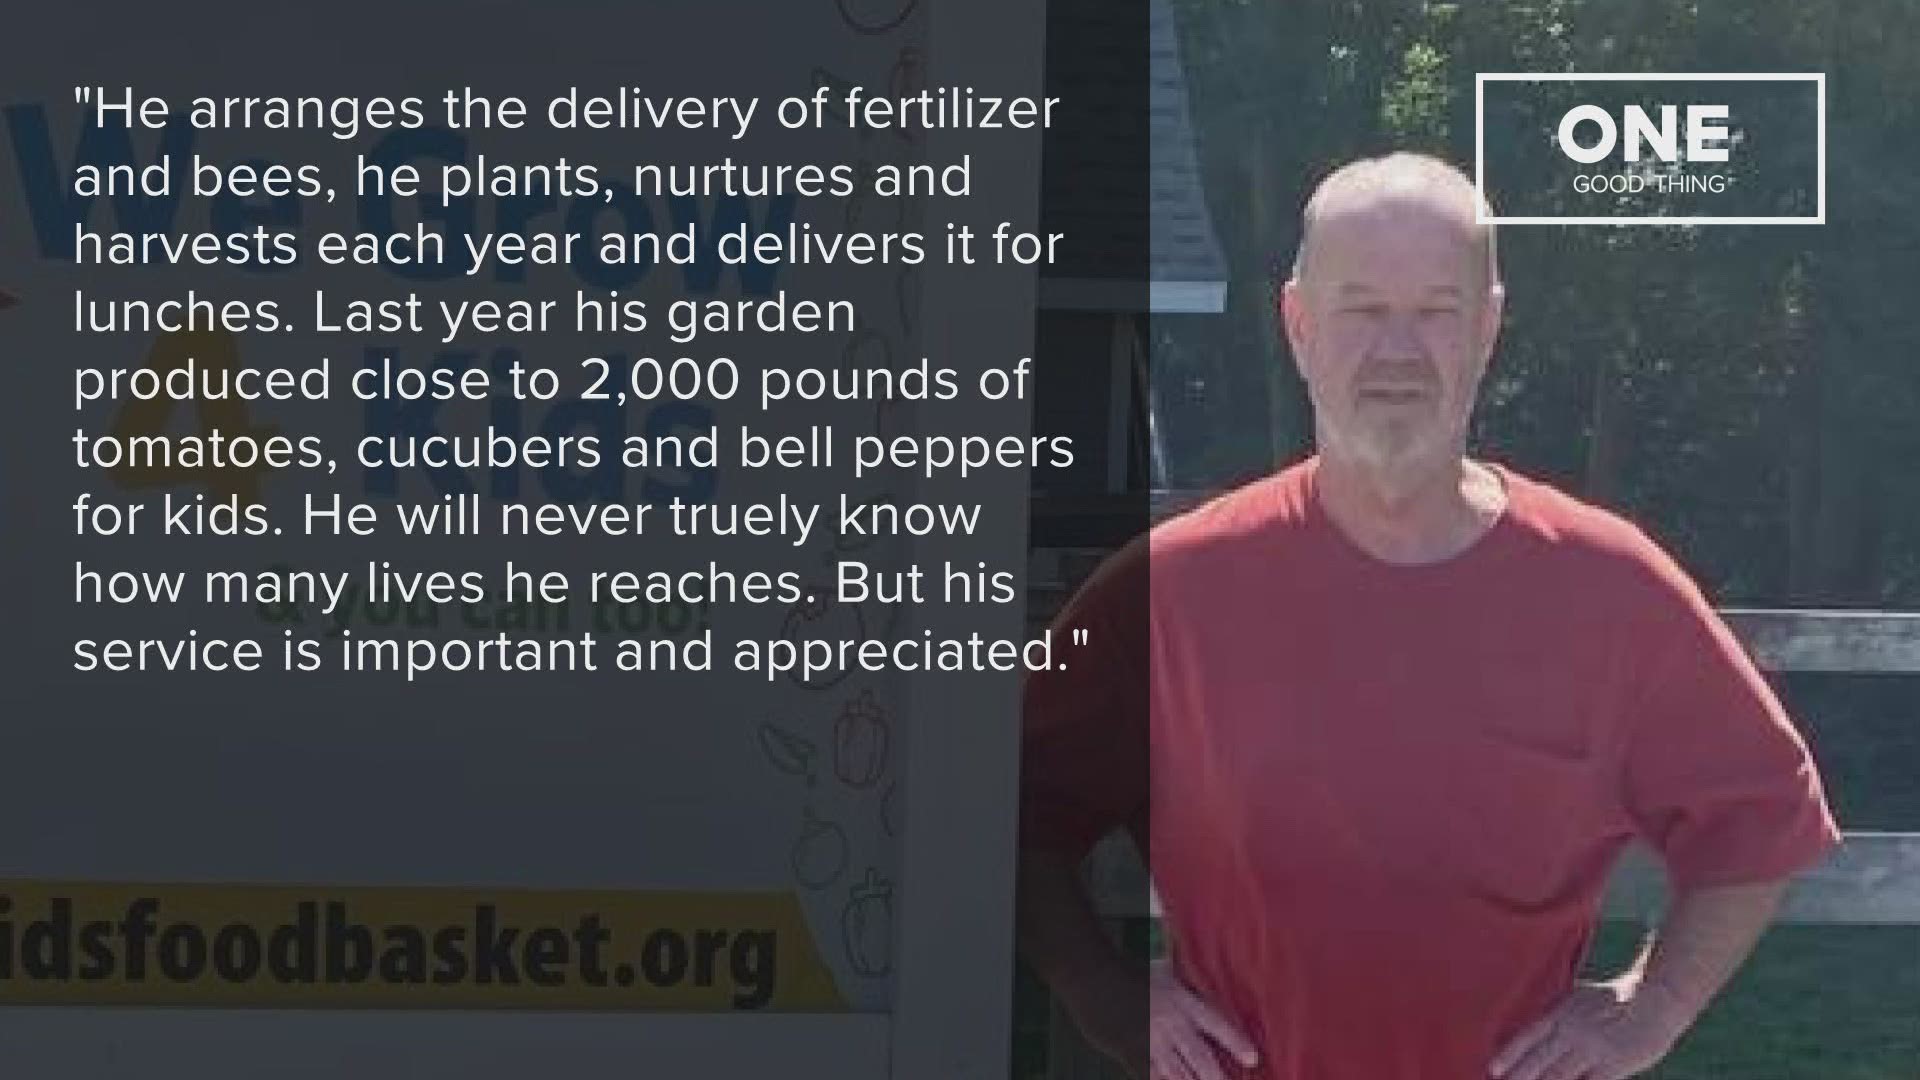 Mike Friday maintains a garden to help supply Kids Food Basket.